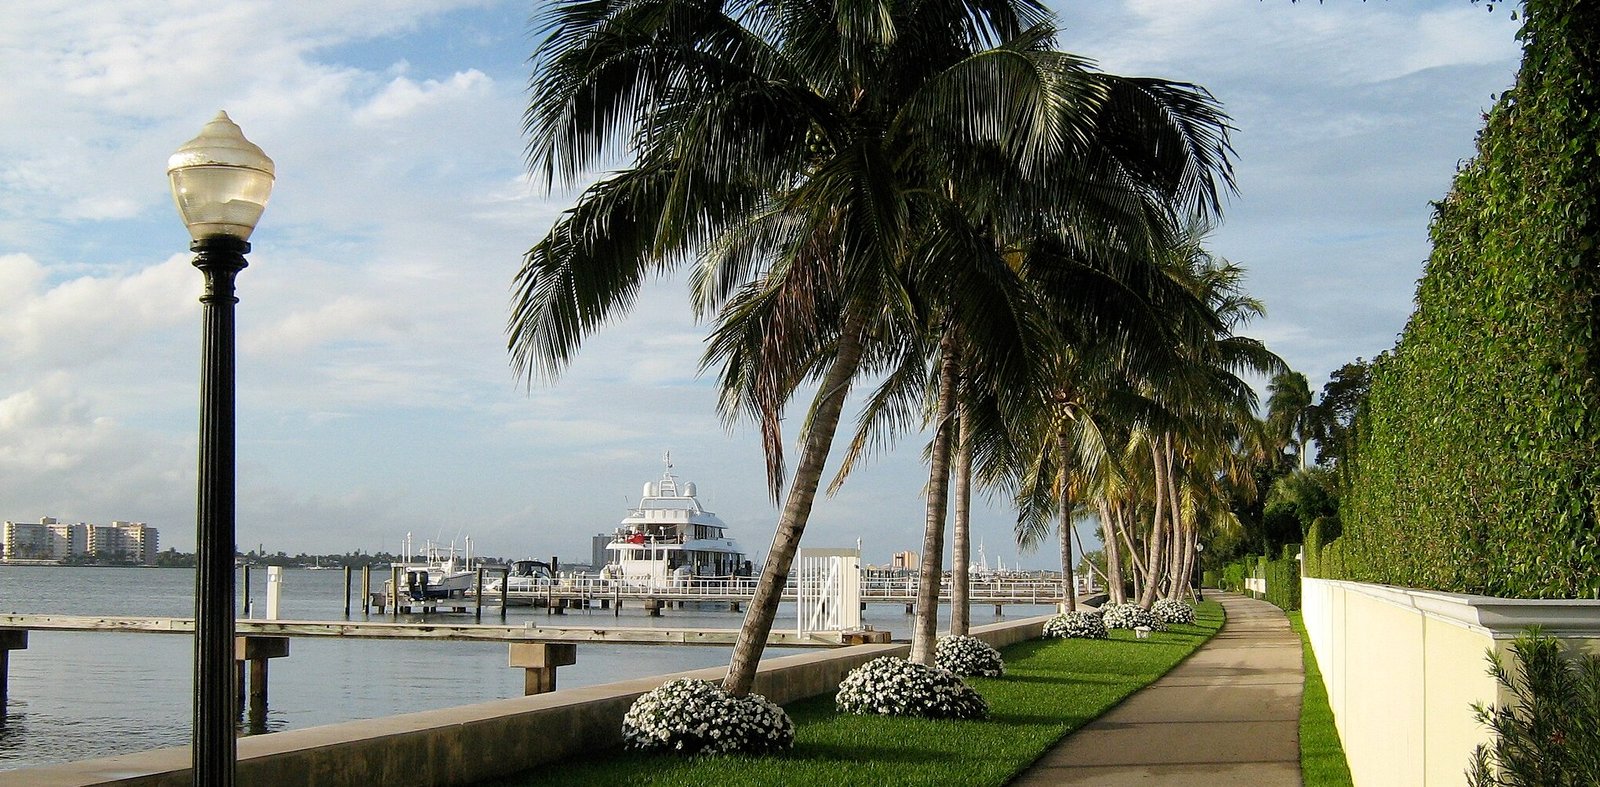 Lake Trail, which runs along the west side of Palm Beach Island